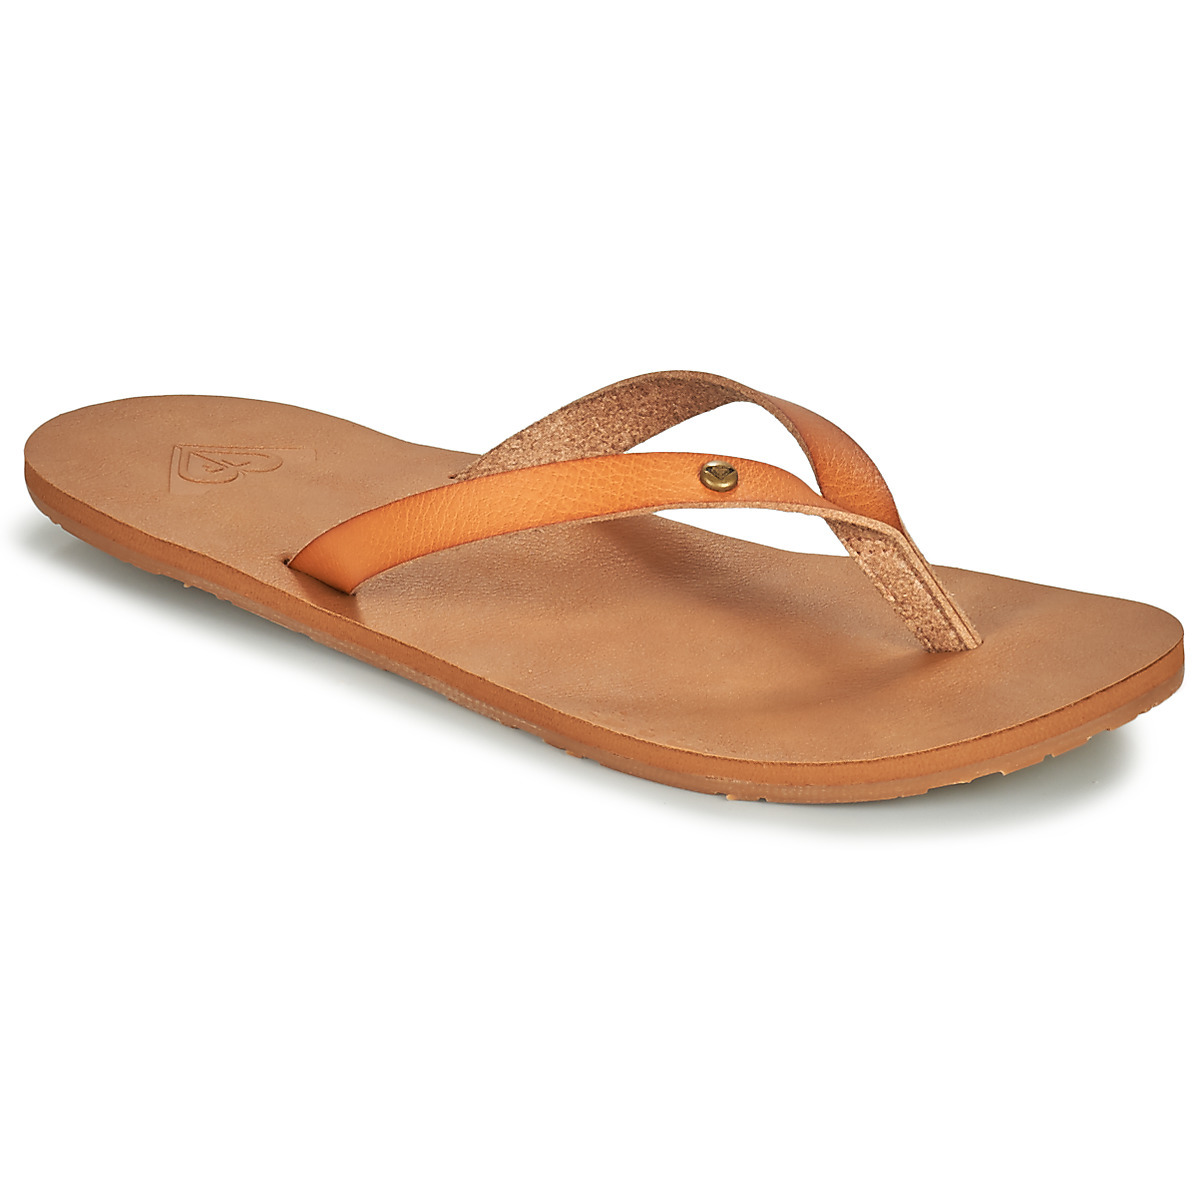 Roxy Flip Flops in Brown for Woman from Spartoo GOOFASH